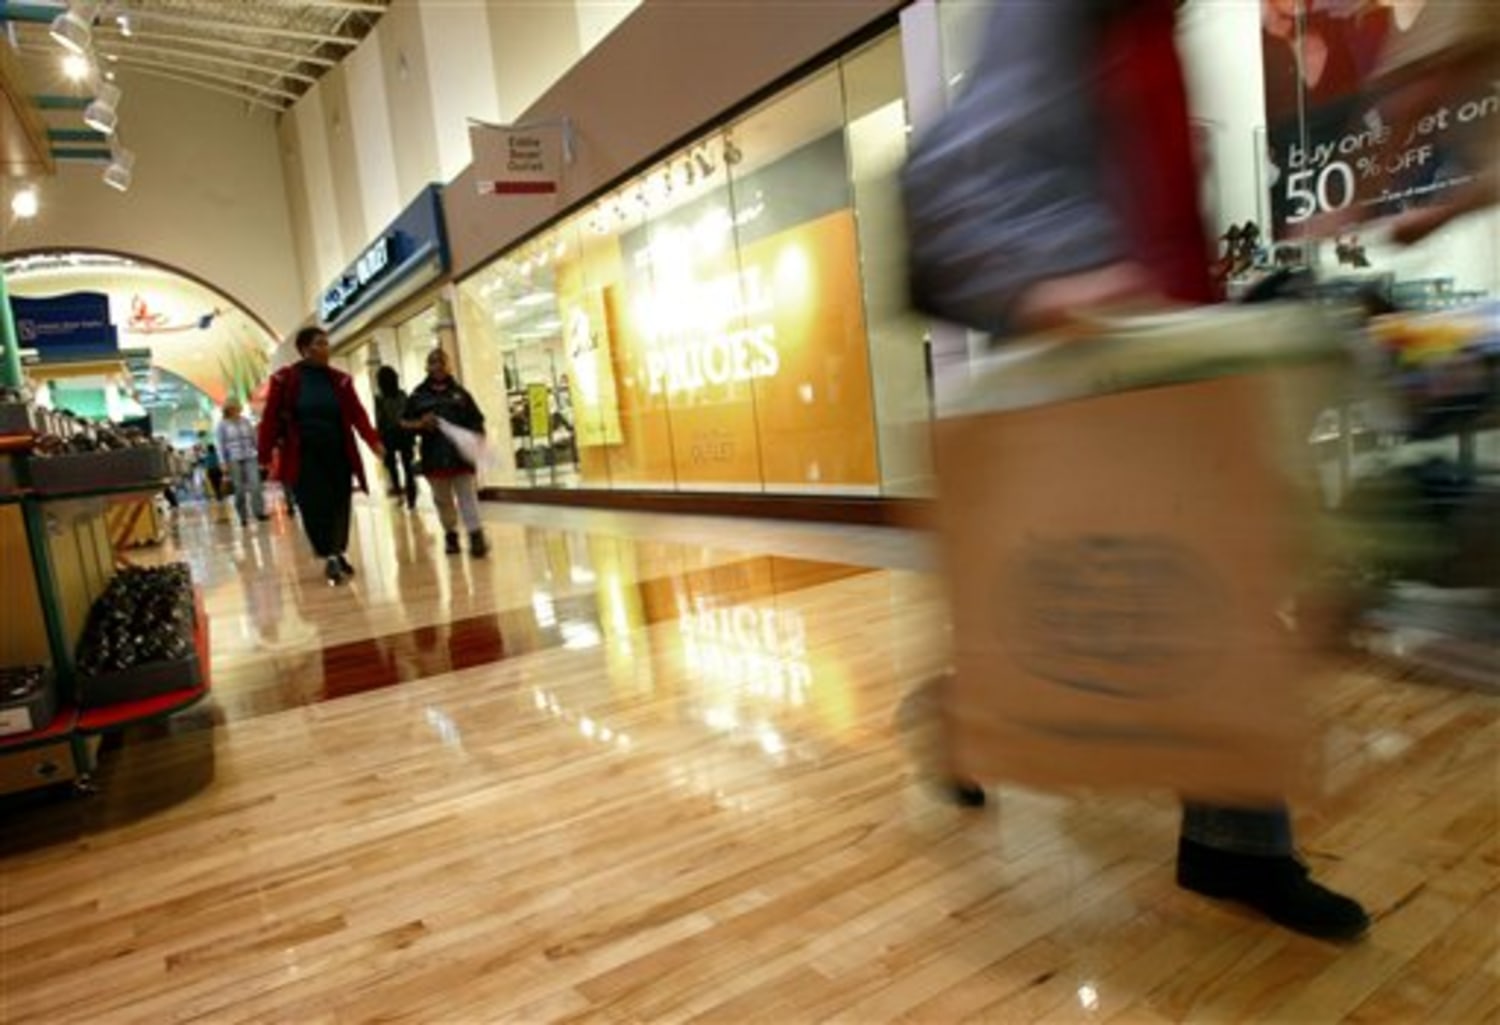 D-FW stores and malls extend hours for Black Friday — but not as much as  years past